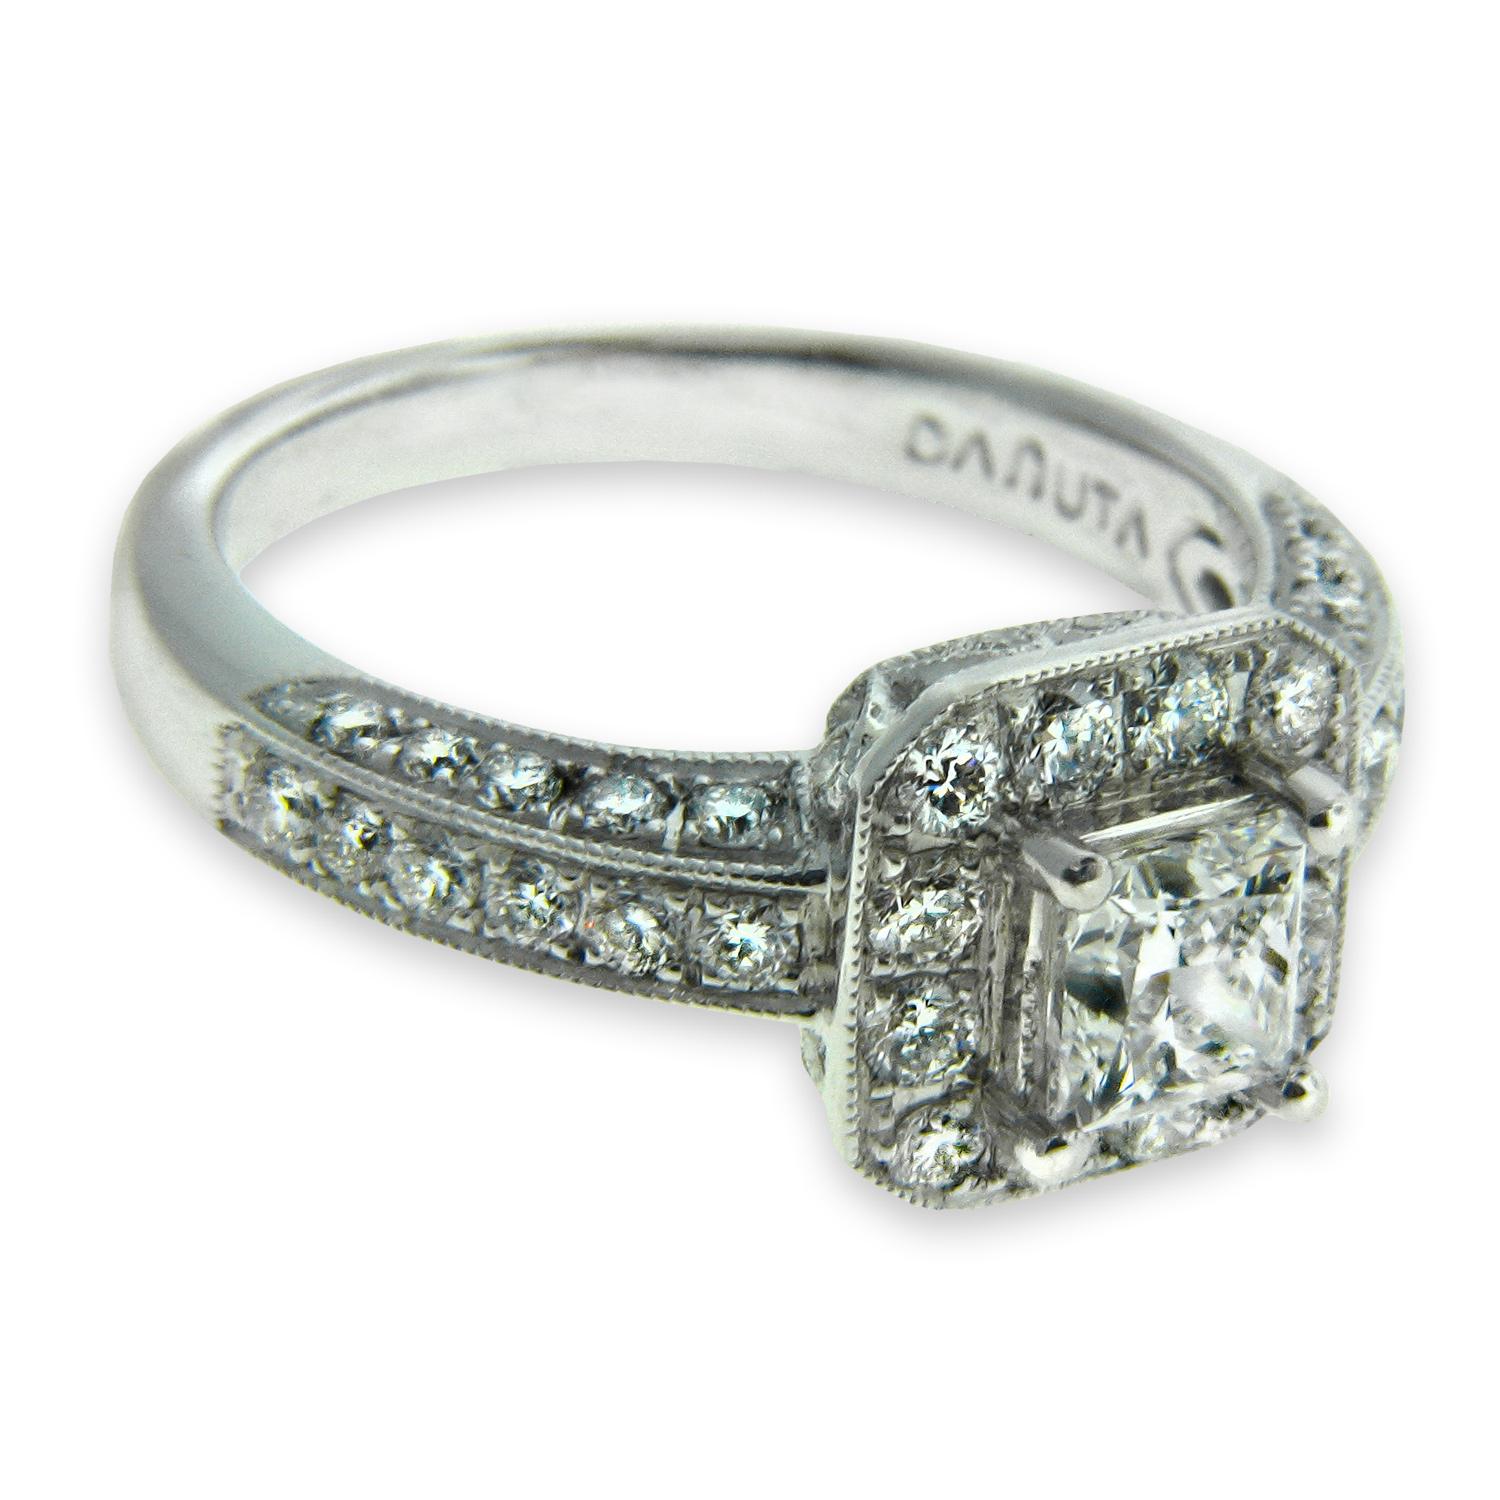 This ring is the epitome of classic design, thoughtful created by world renowned jewelry designer Danuta. The focal point is the GIA certified .71 carat Princess Cut Diamond E/VS1 color/clarity. This princess cut diamond easily conveys a high degree